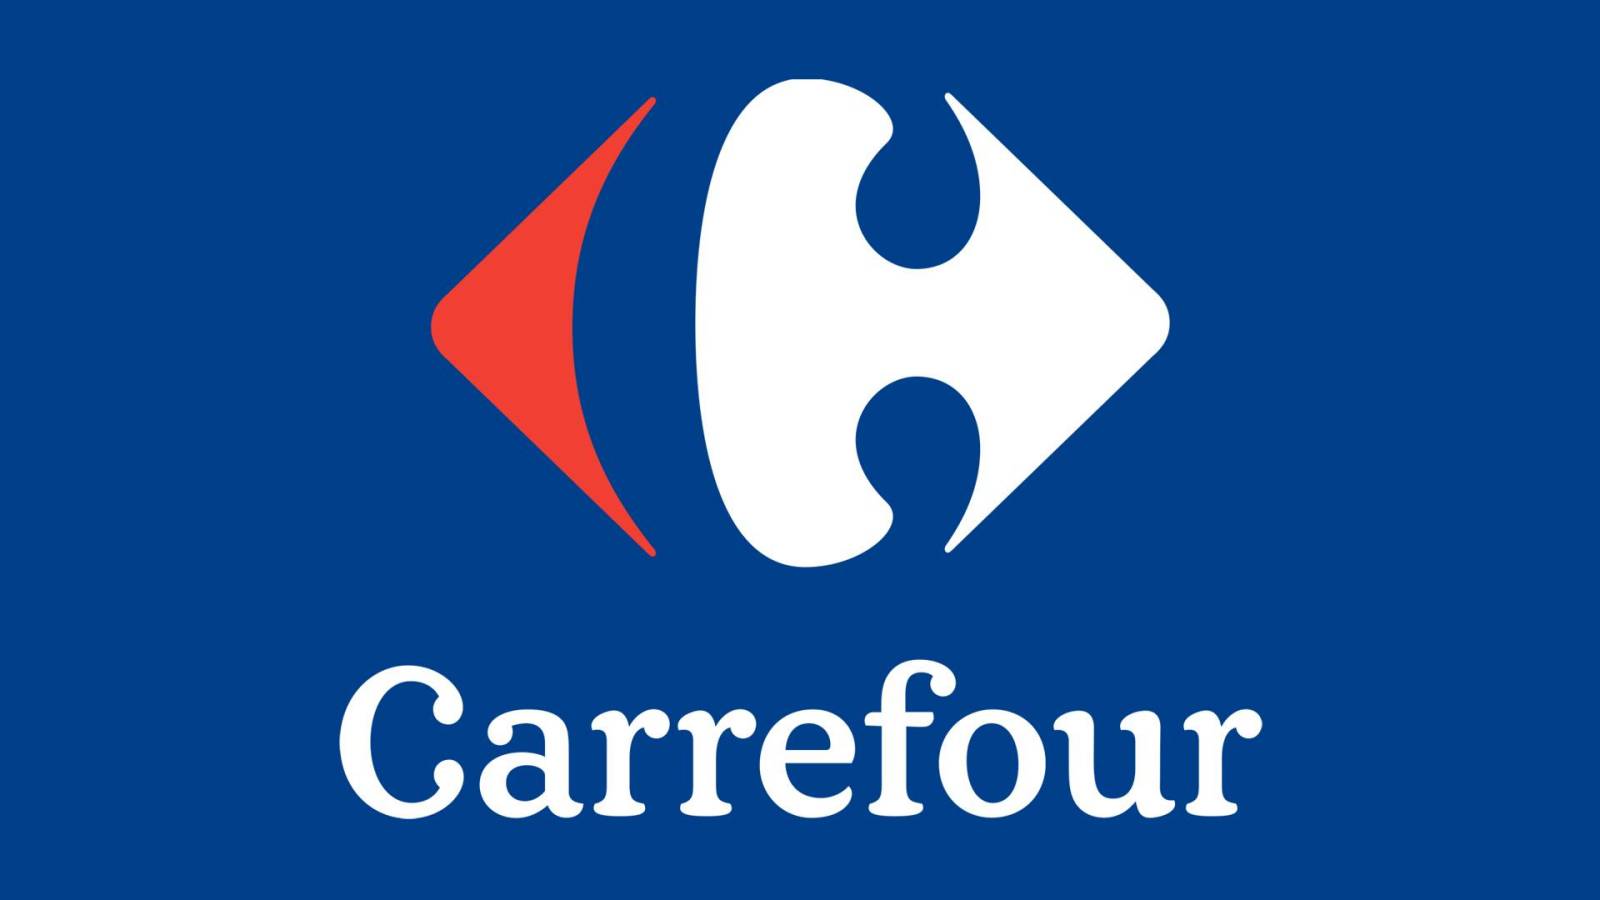 Carrefour IMPORTANT FREE DECISION to Romanians All over the Country